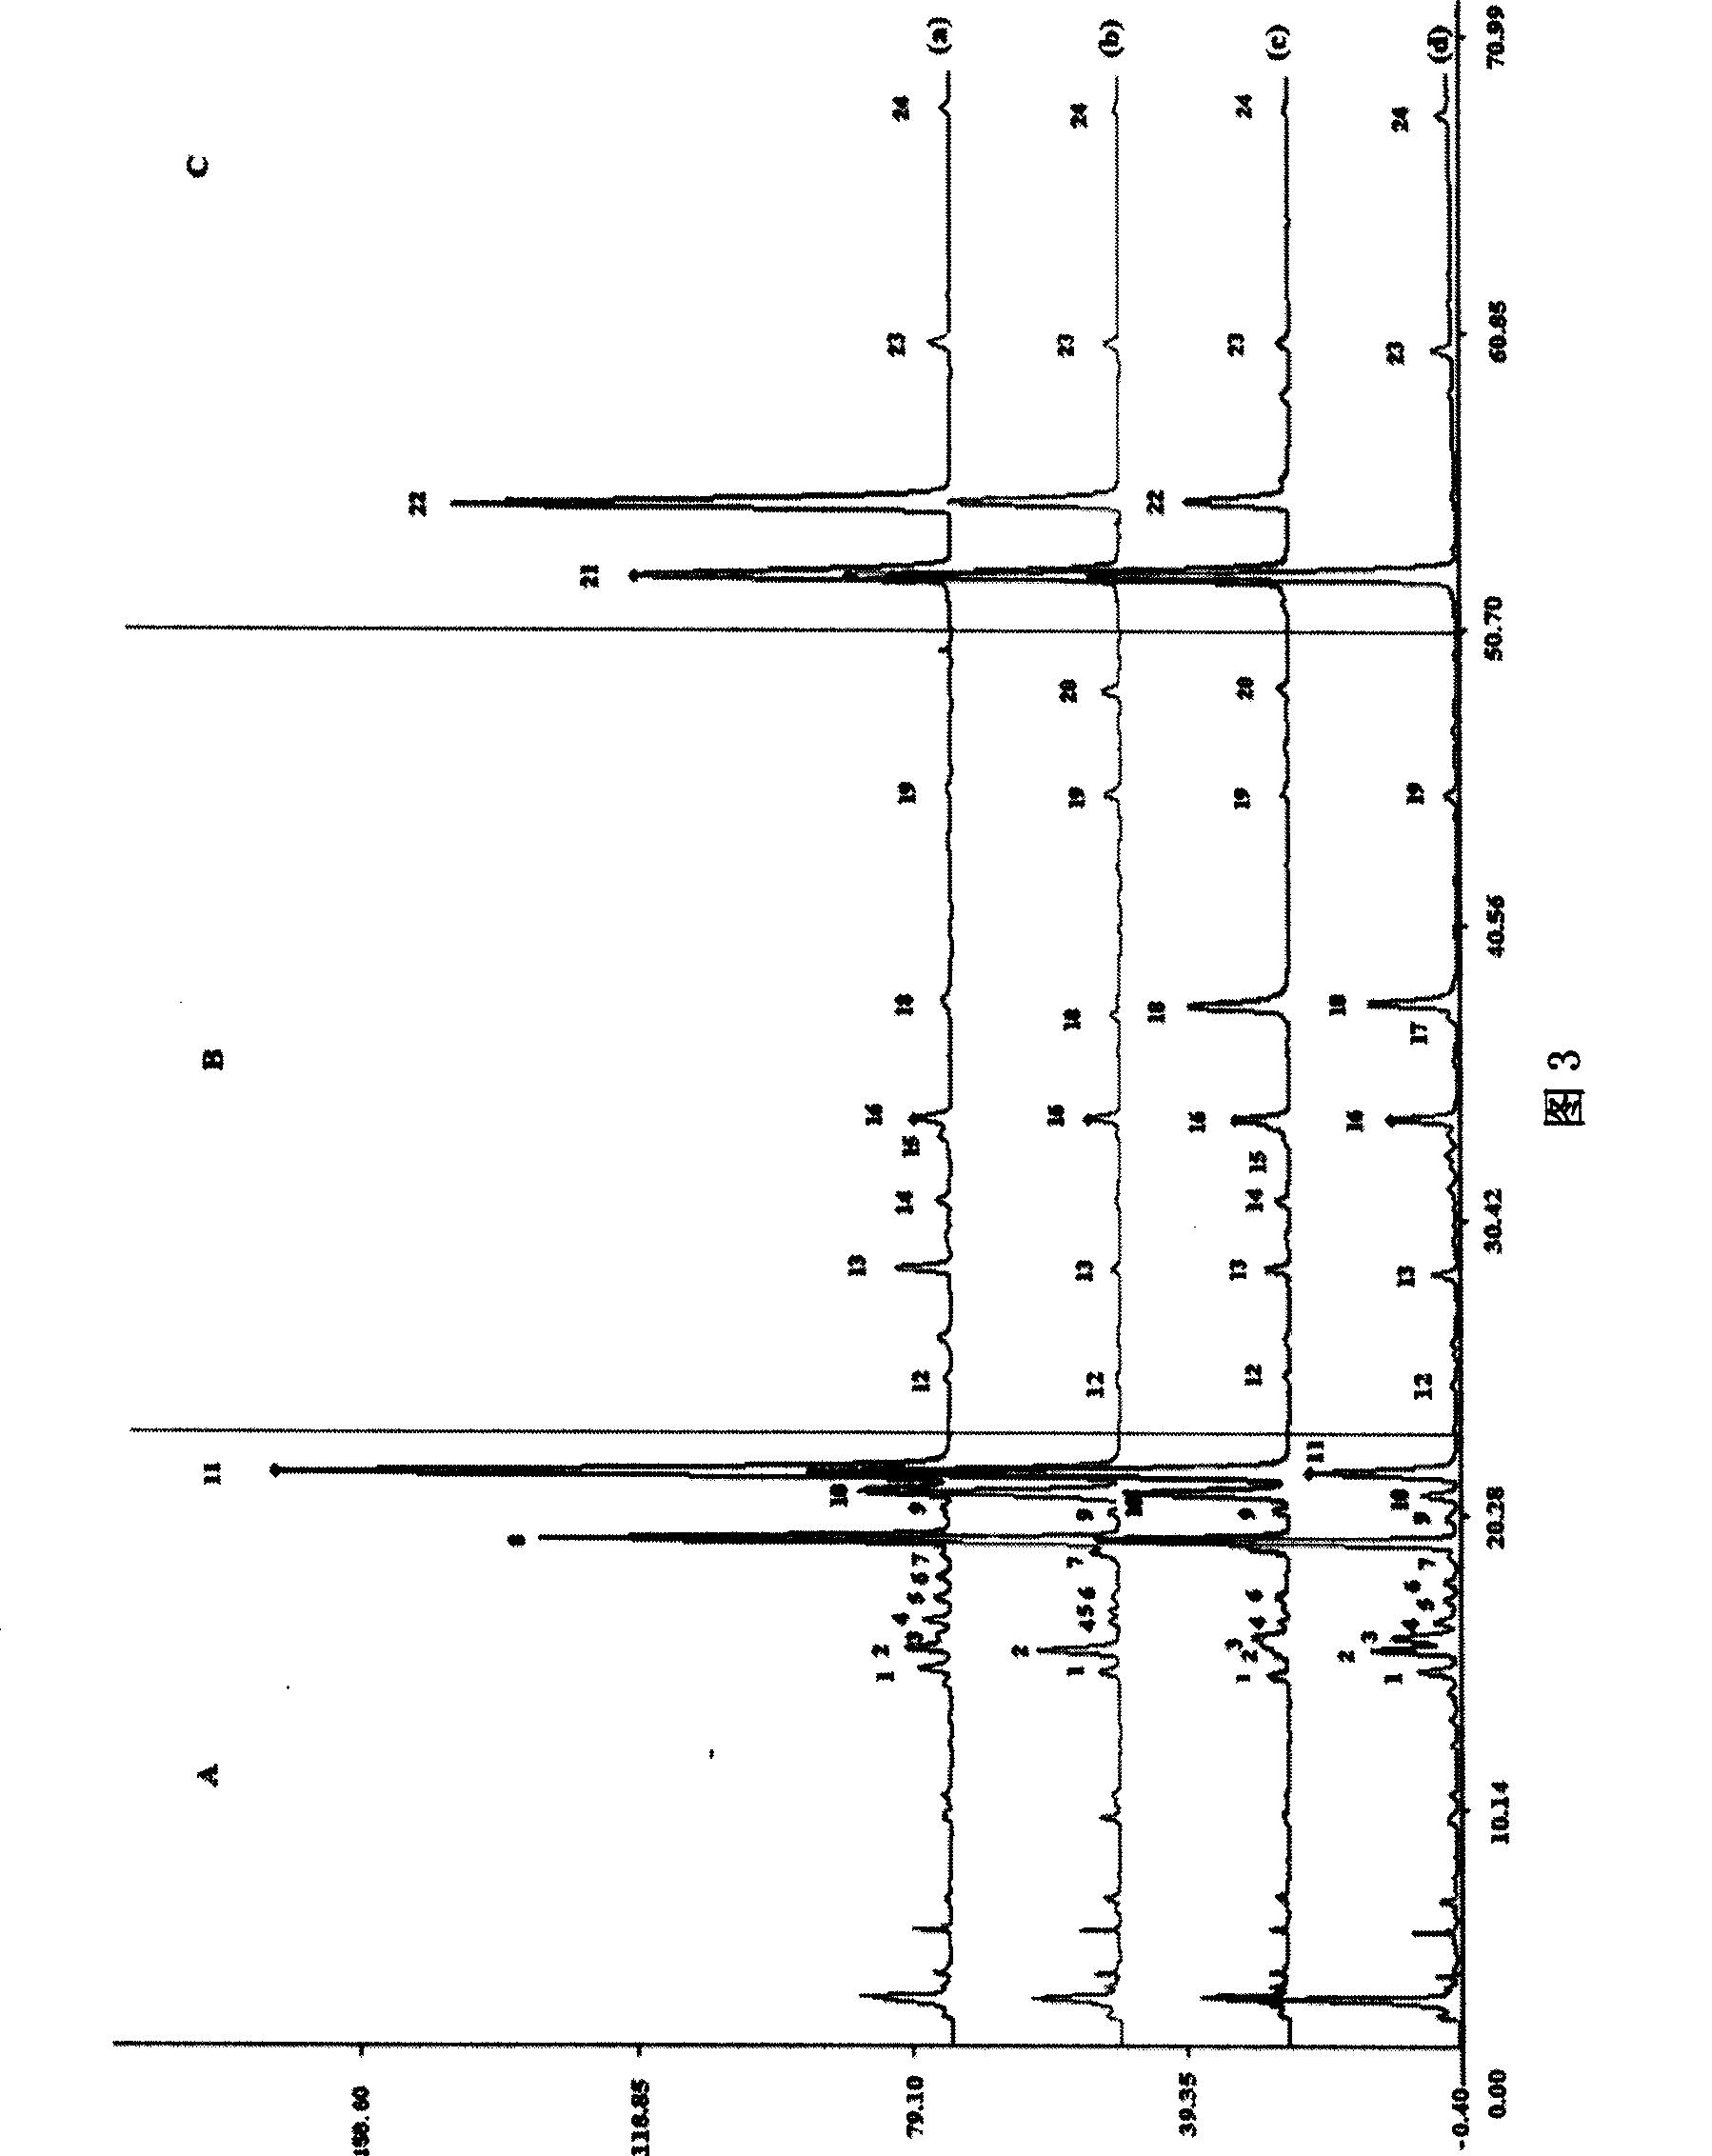 Total alkaloid extract of seeds of harmel genus and effective monomer component thereof, and preparation and use thereof